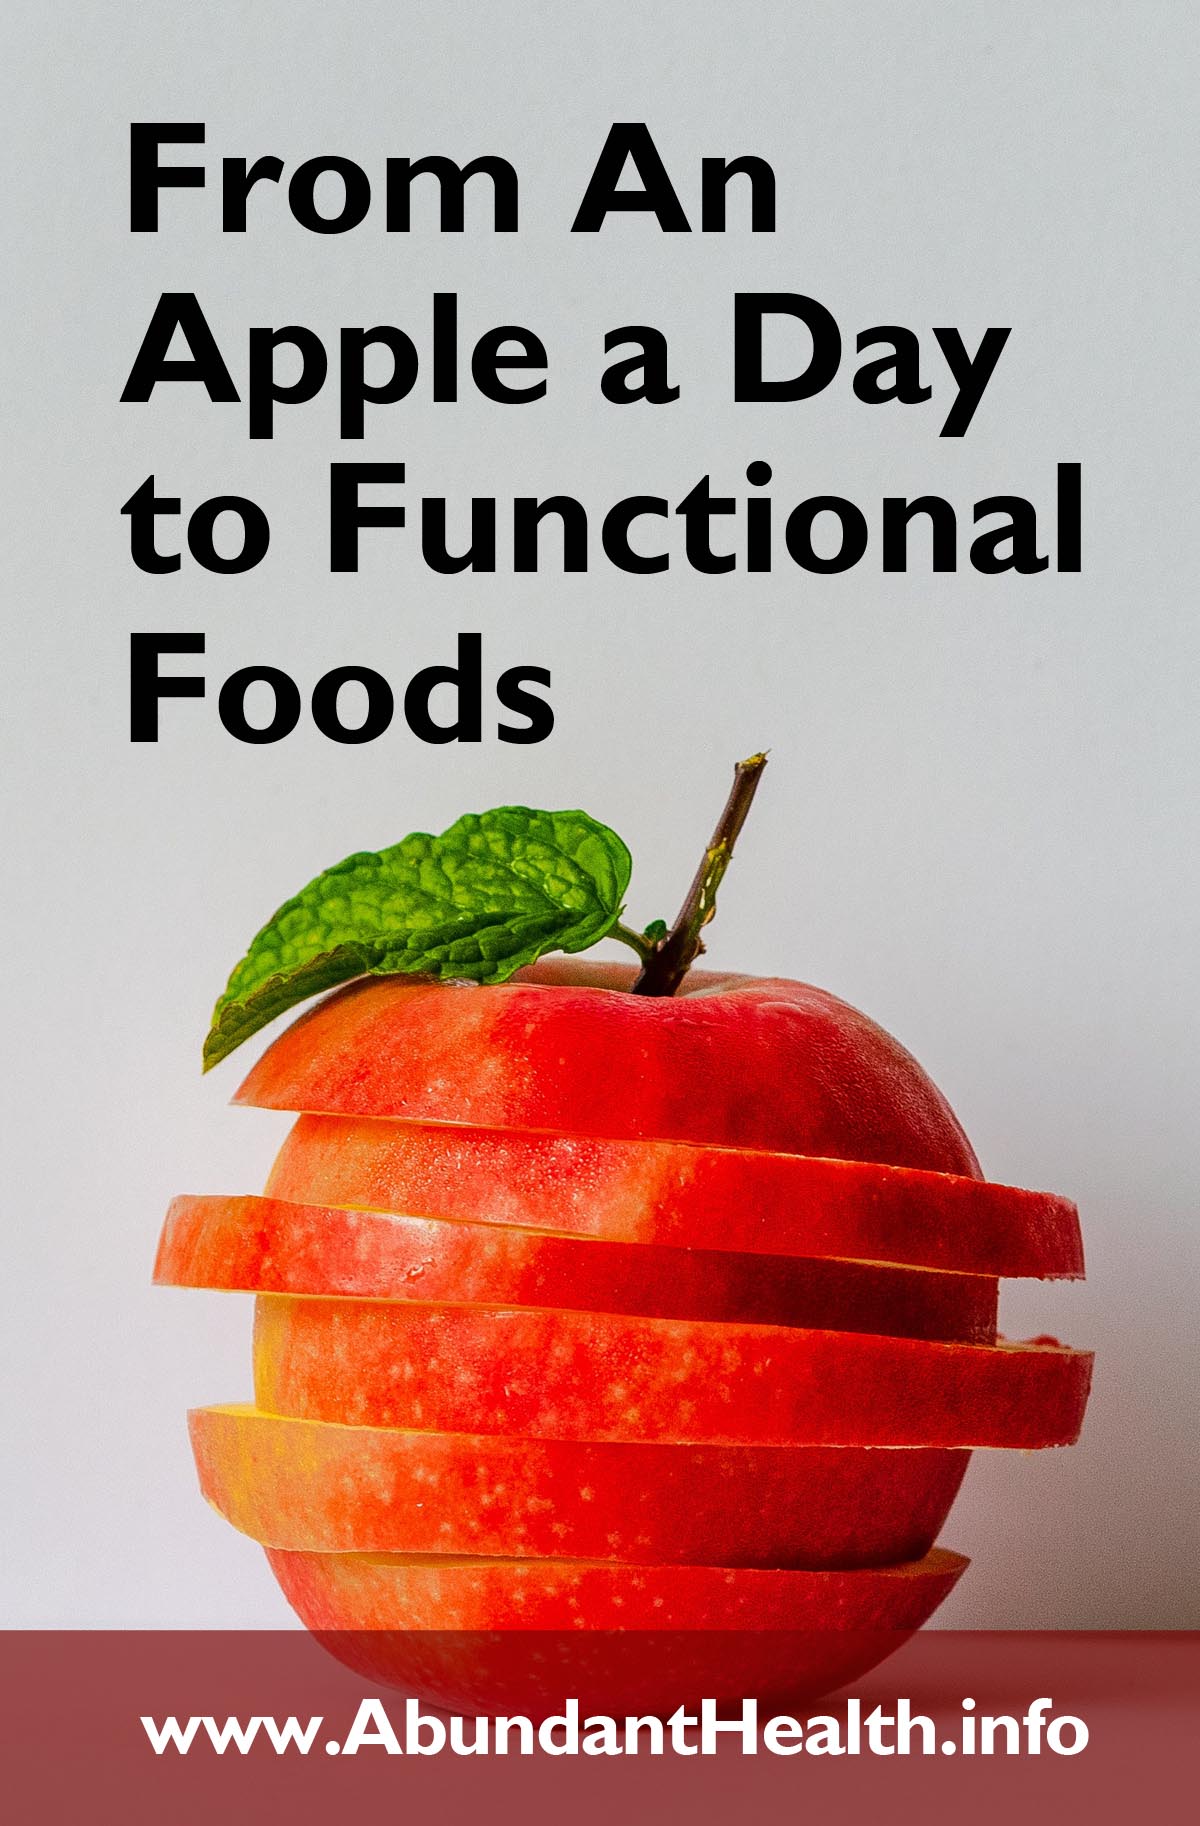 From An Apple a Day to Functional Foods